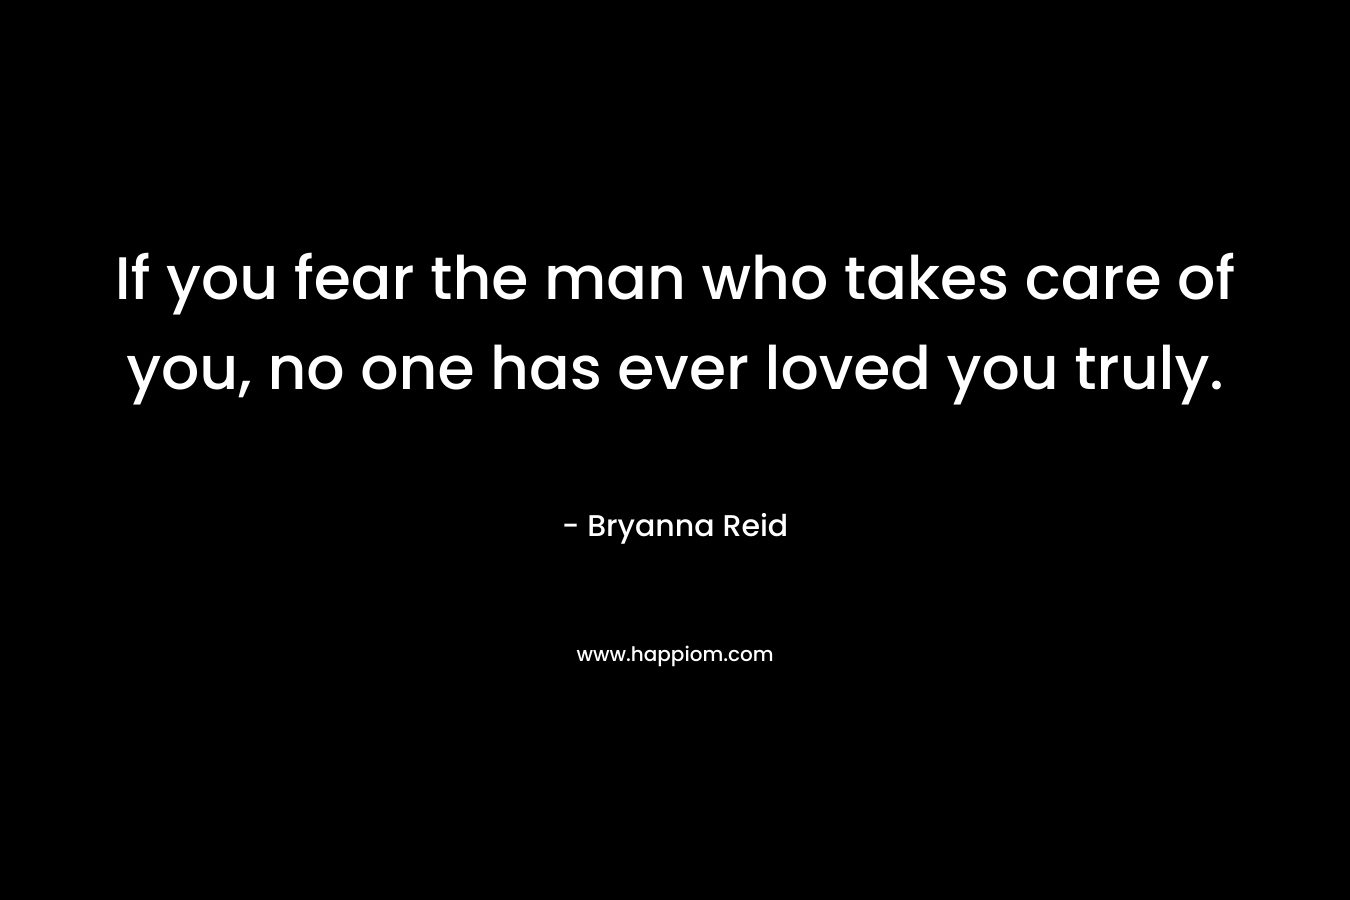 If you fear the man who takes care of you, no one has ever loved you truly. – Bryanna Reid